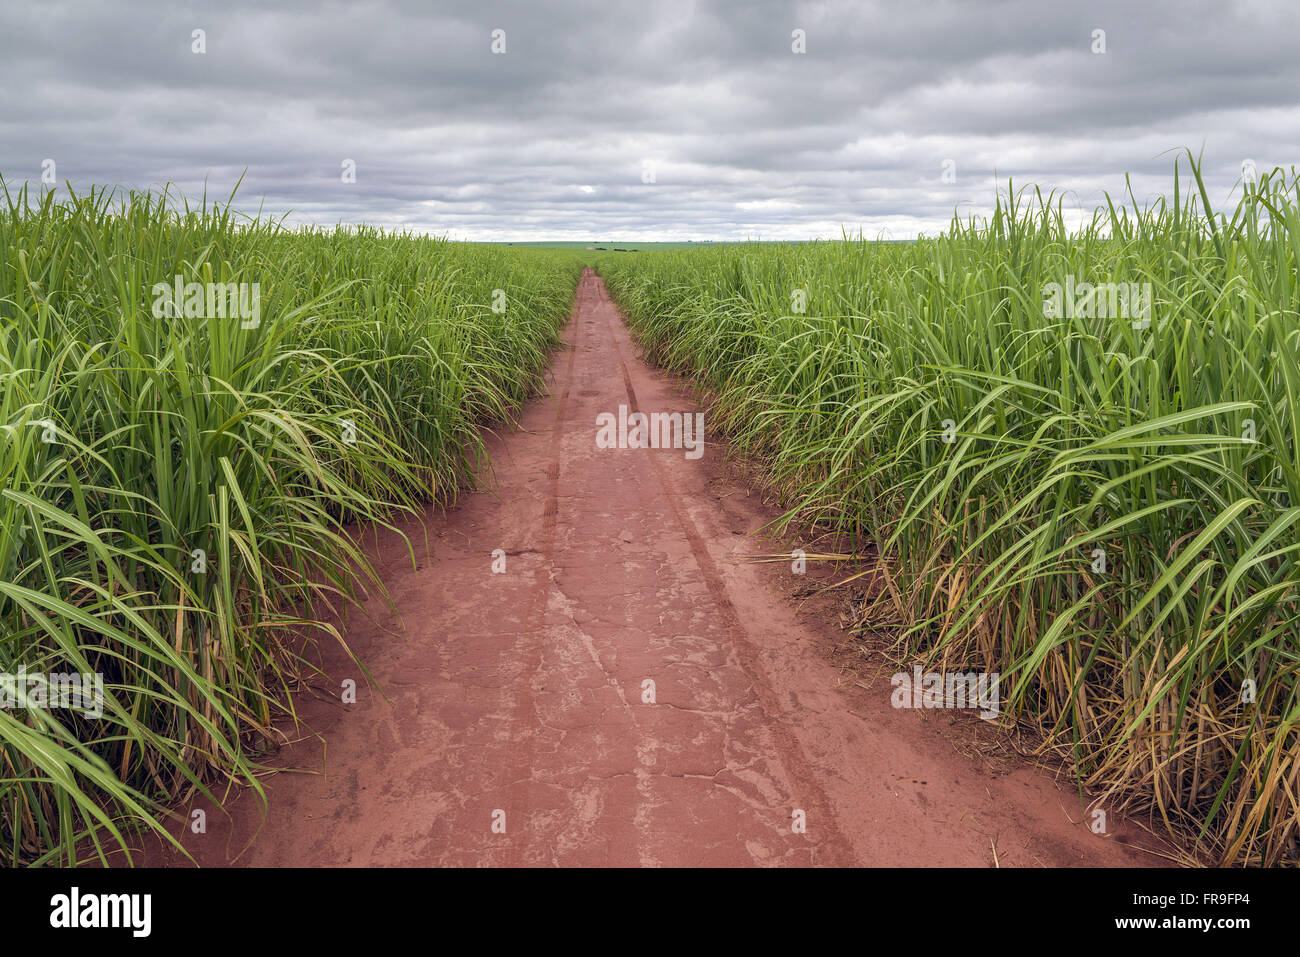 Dirt road through a sugarcane plantation in the countryside Stock Photo